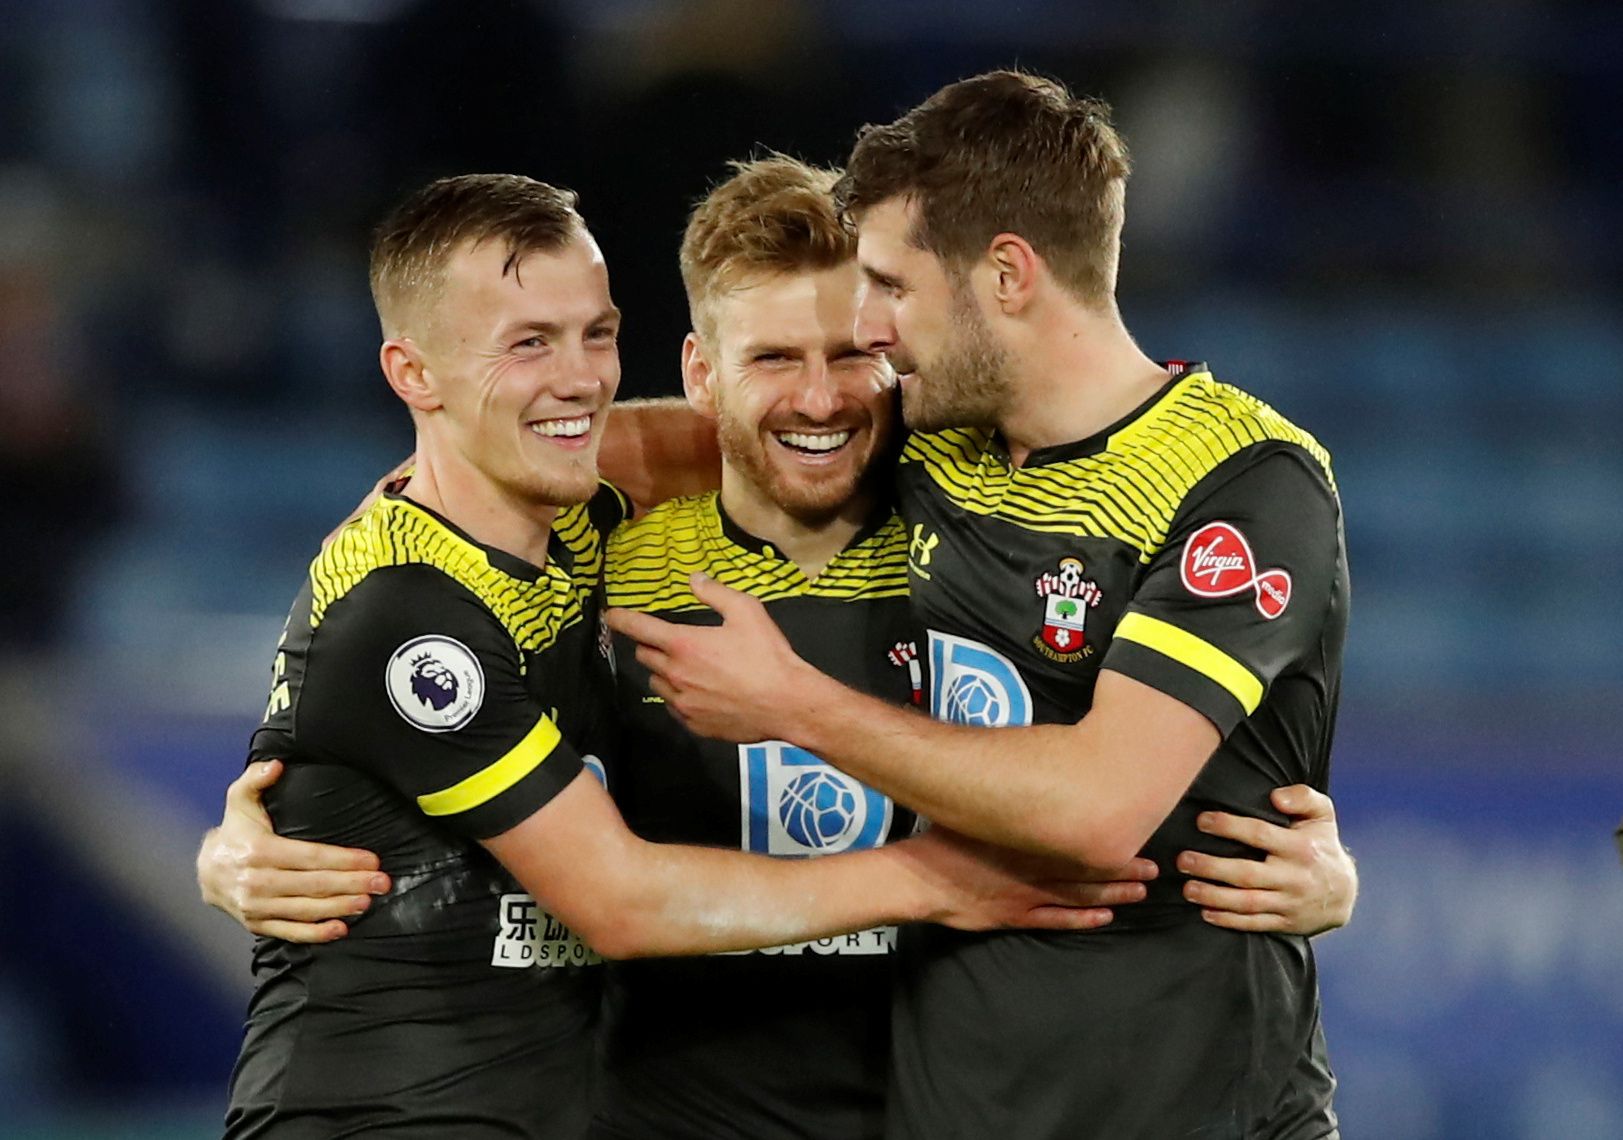 Soccer Football - Premier League - Leicester City v Southampton - King Power Stadium, Leicester, Britain - January 11, 2020  Southampton's James Ward-Prowse celebrates after the match with Stuart Armstrong and Jack Stephens   Action Images via Reuters/Andrew Boyers  EDITORIAL USE ONLY. No use with unauthorized audio, video, data, fixture lists, club/league logos or 